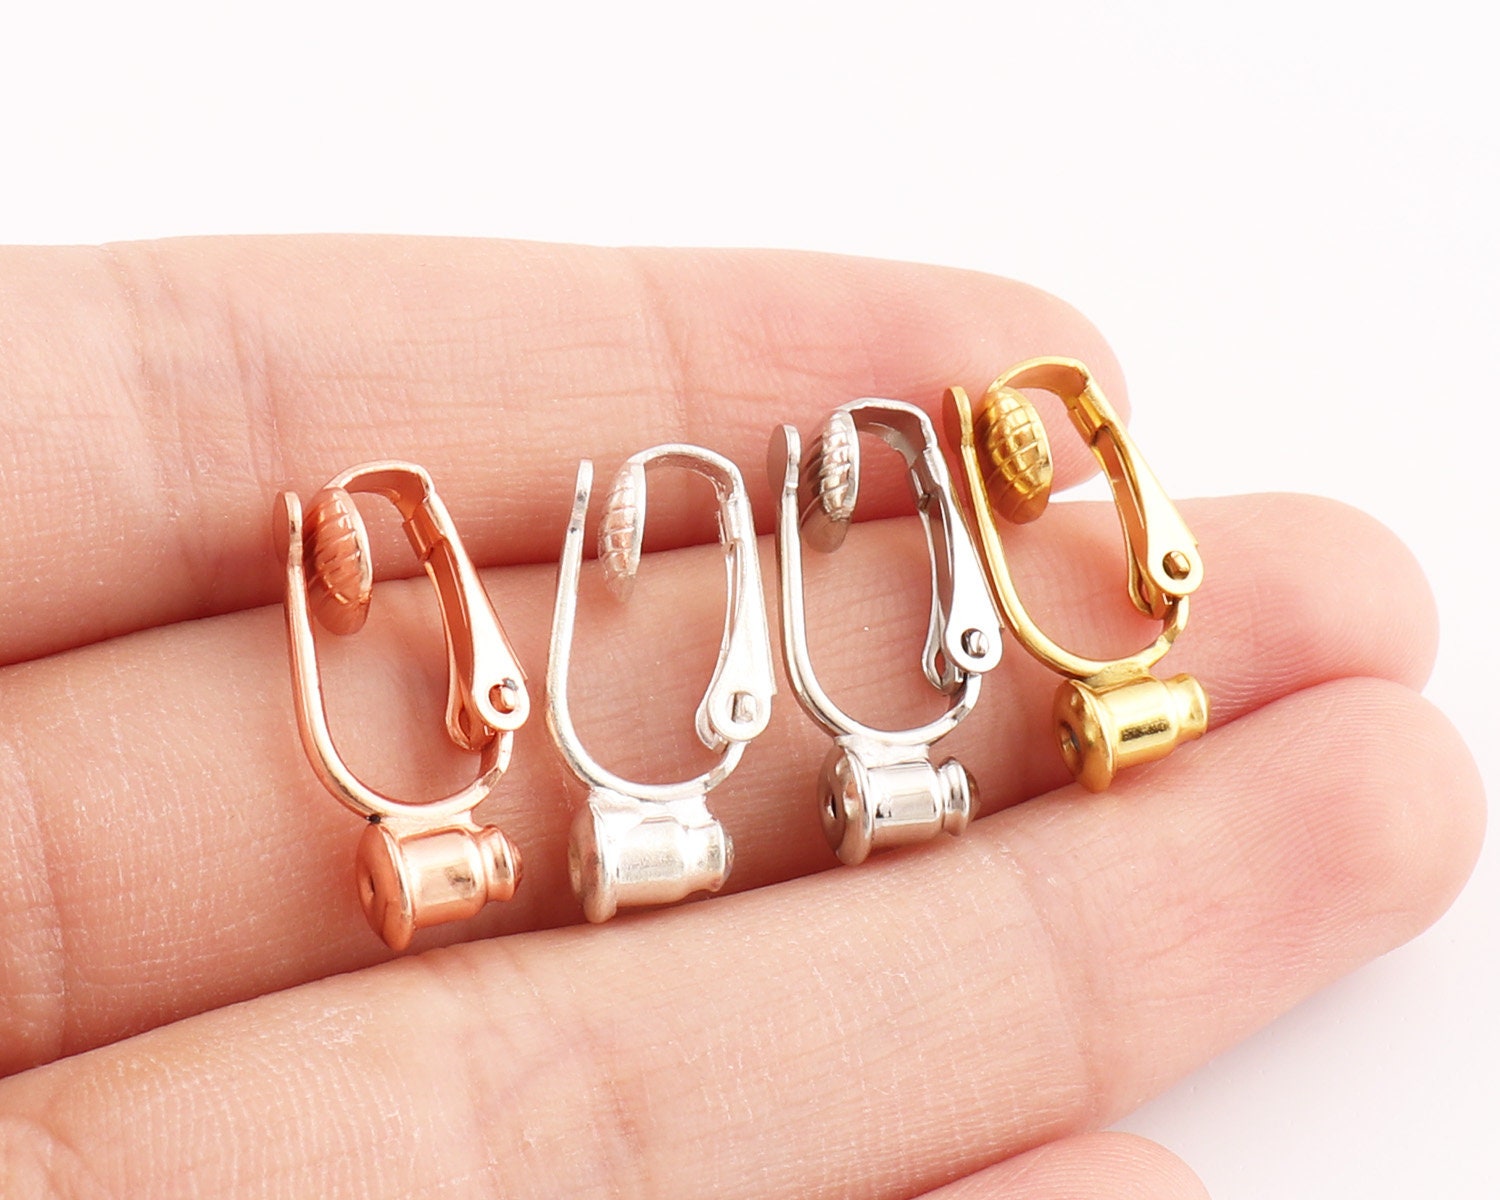 1 Pair DIY Clip-on Earring Converters Jewelry Findings for None Pierced  Ears Dropshipping